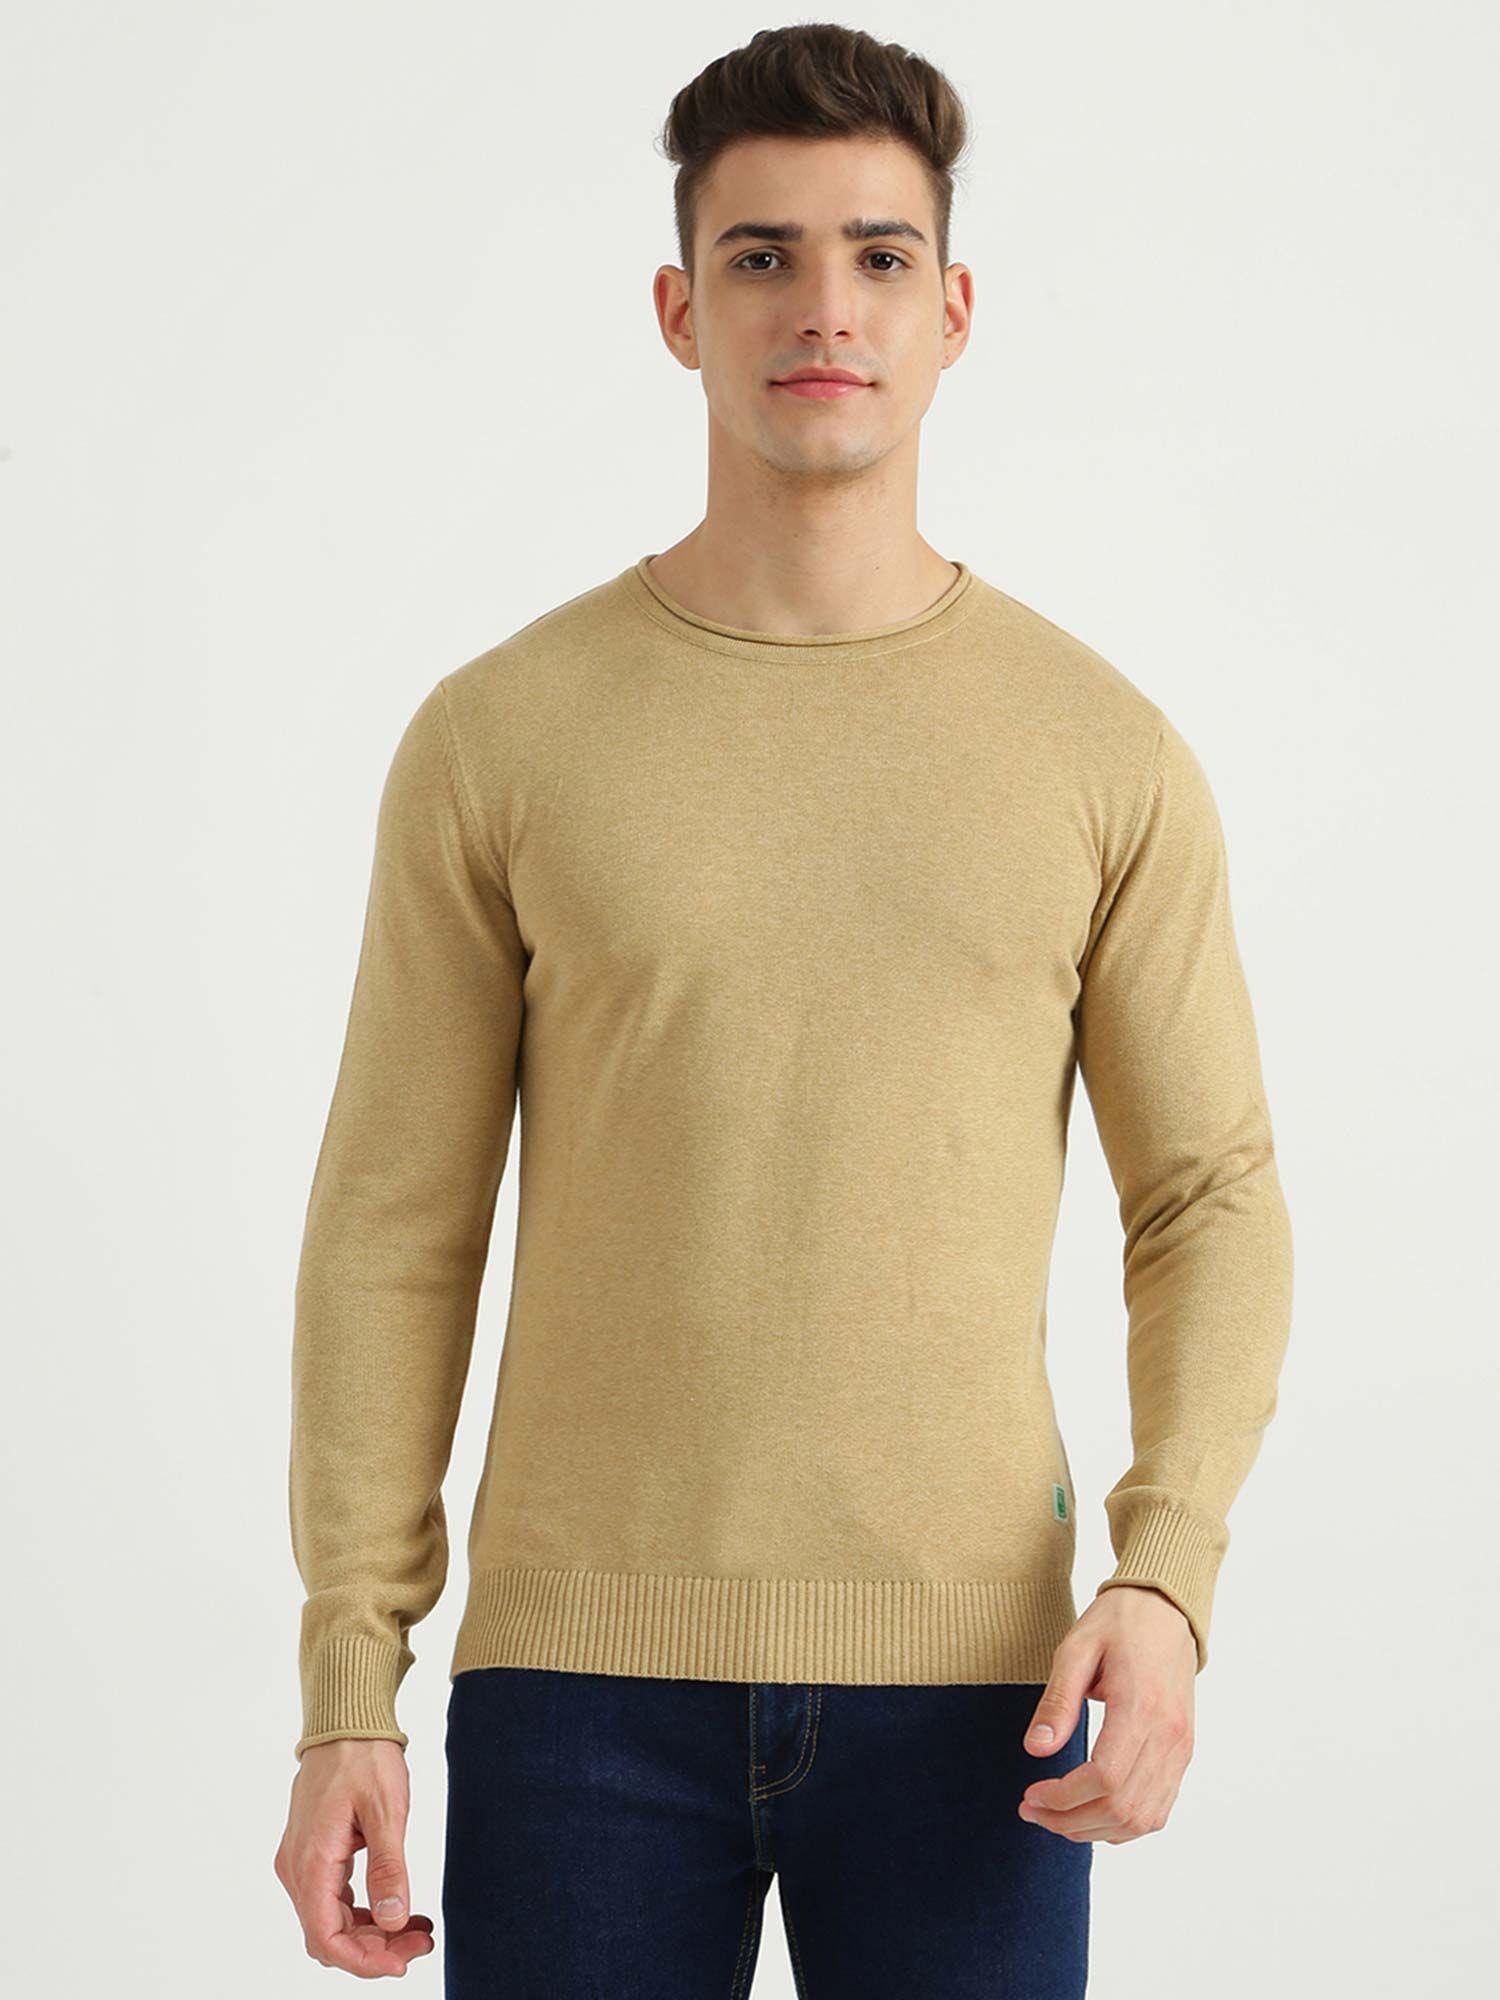 mens long sleeve solid sweater